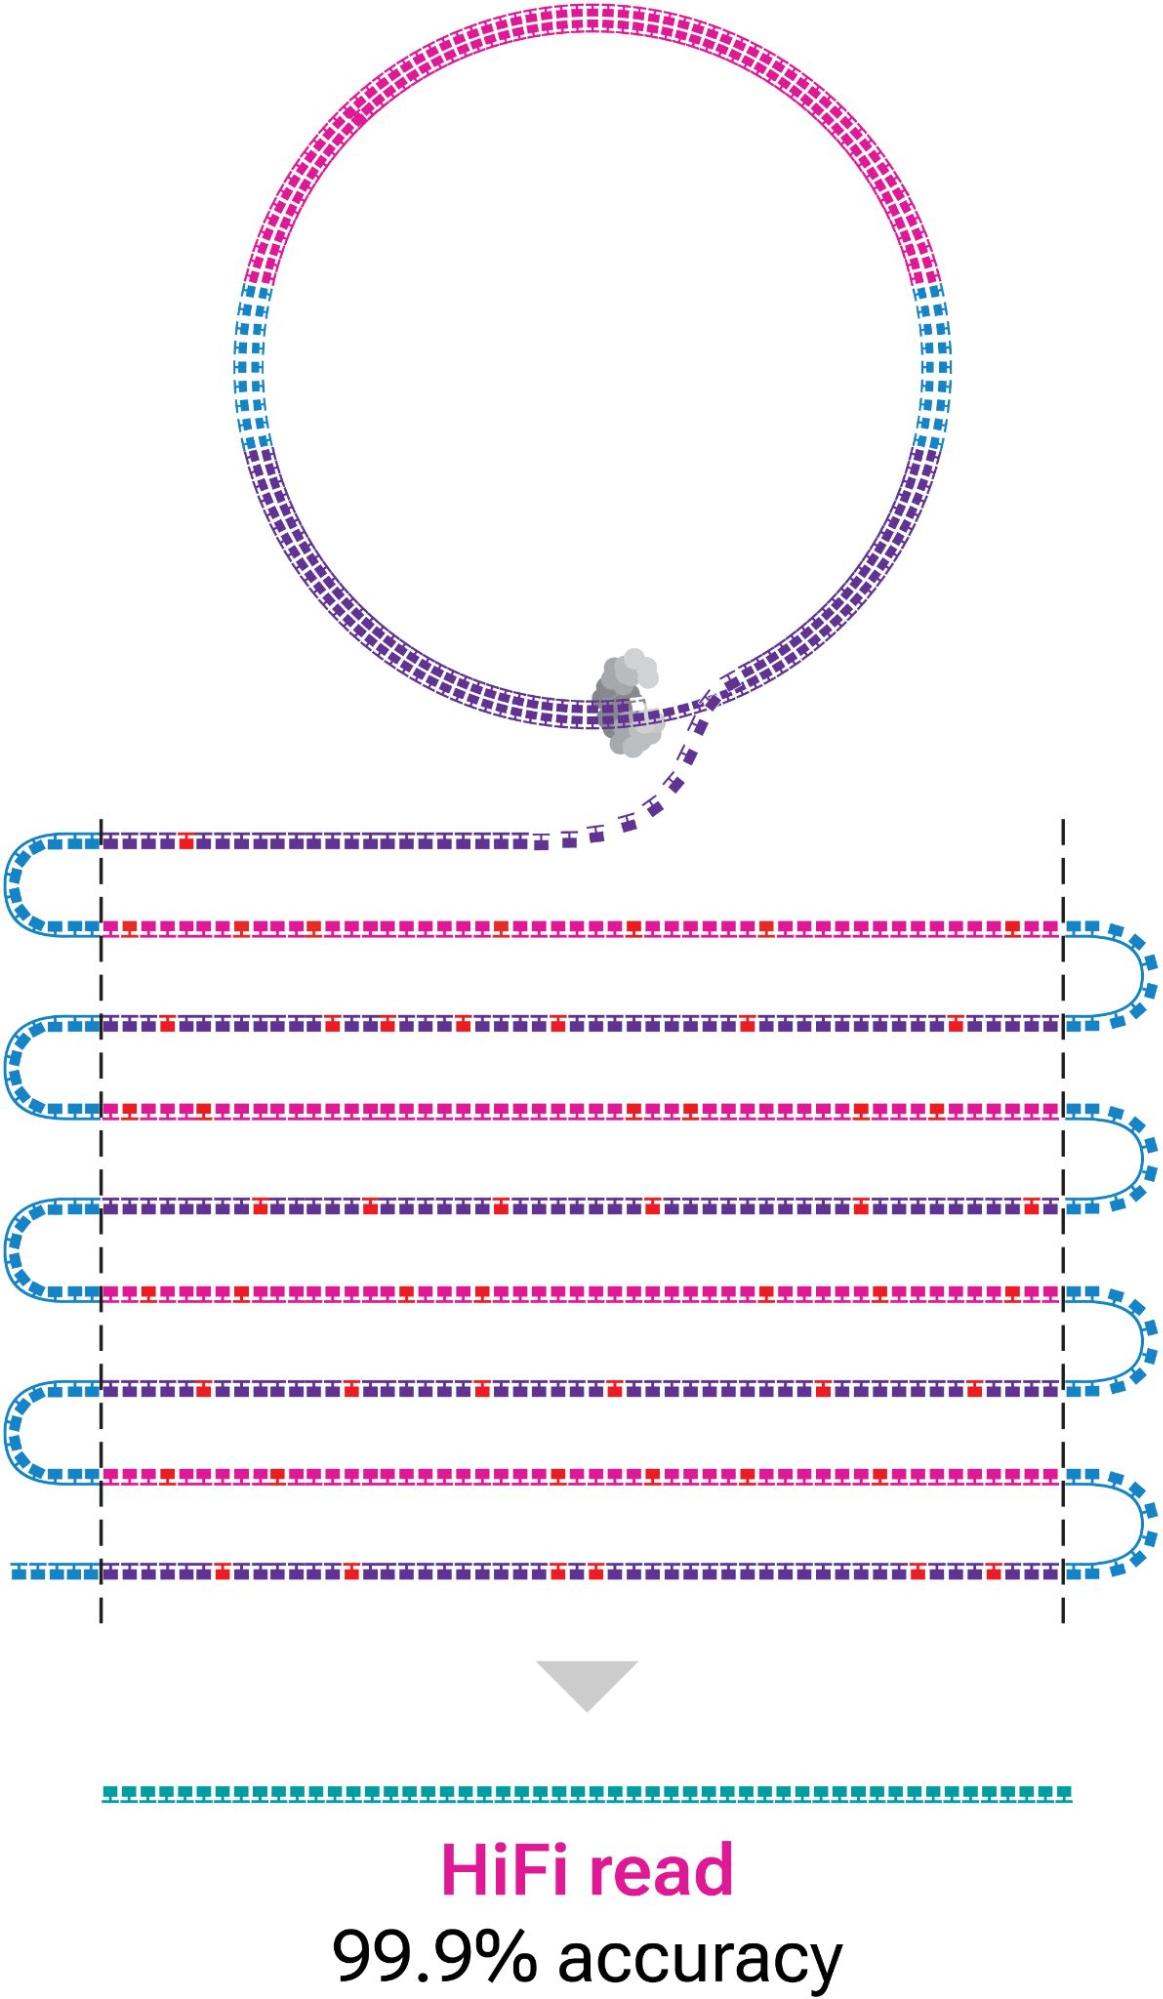 Diagram shows circularized DNA sequenced in repeated passes. In the lowest part, the polymerase reads are trimmed of adapters to yield subreads, from which a consensus is called for the HiFi read.